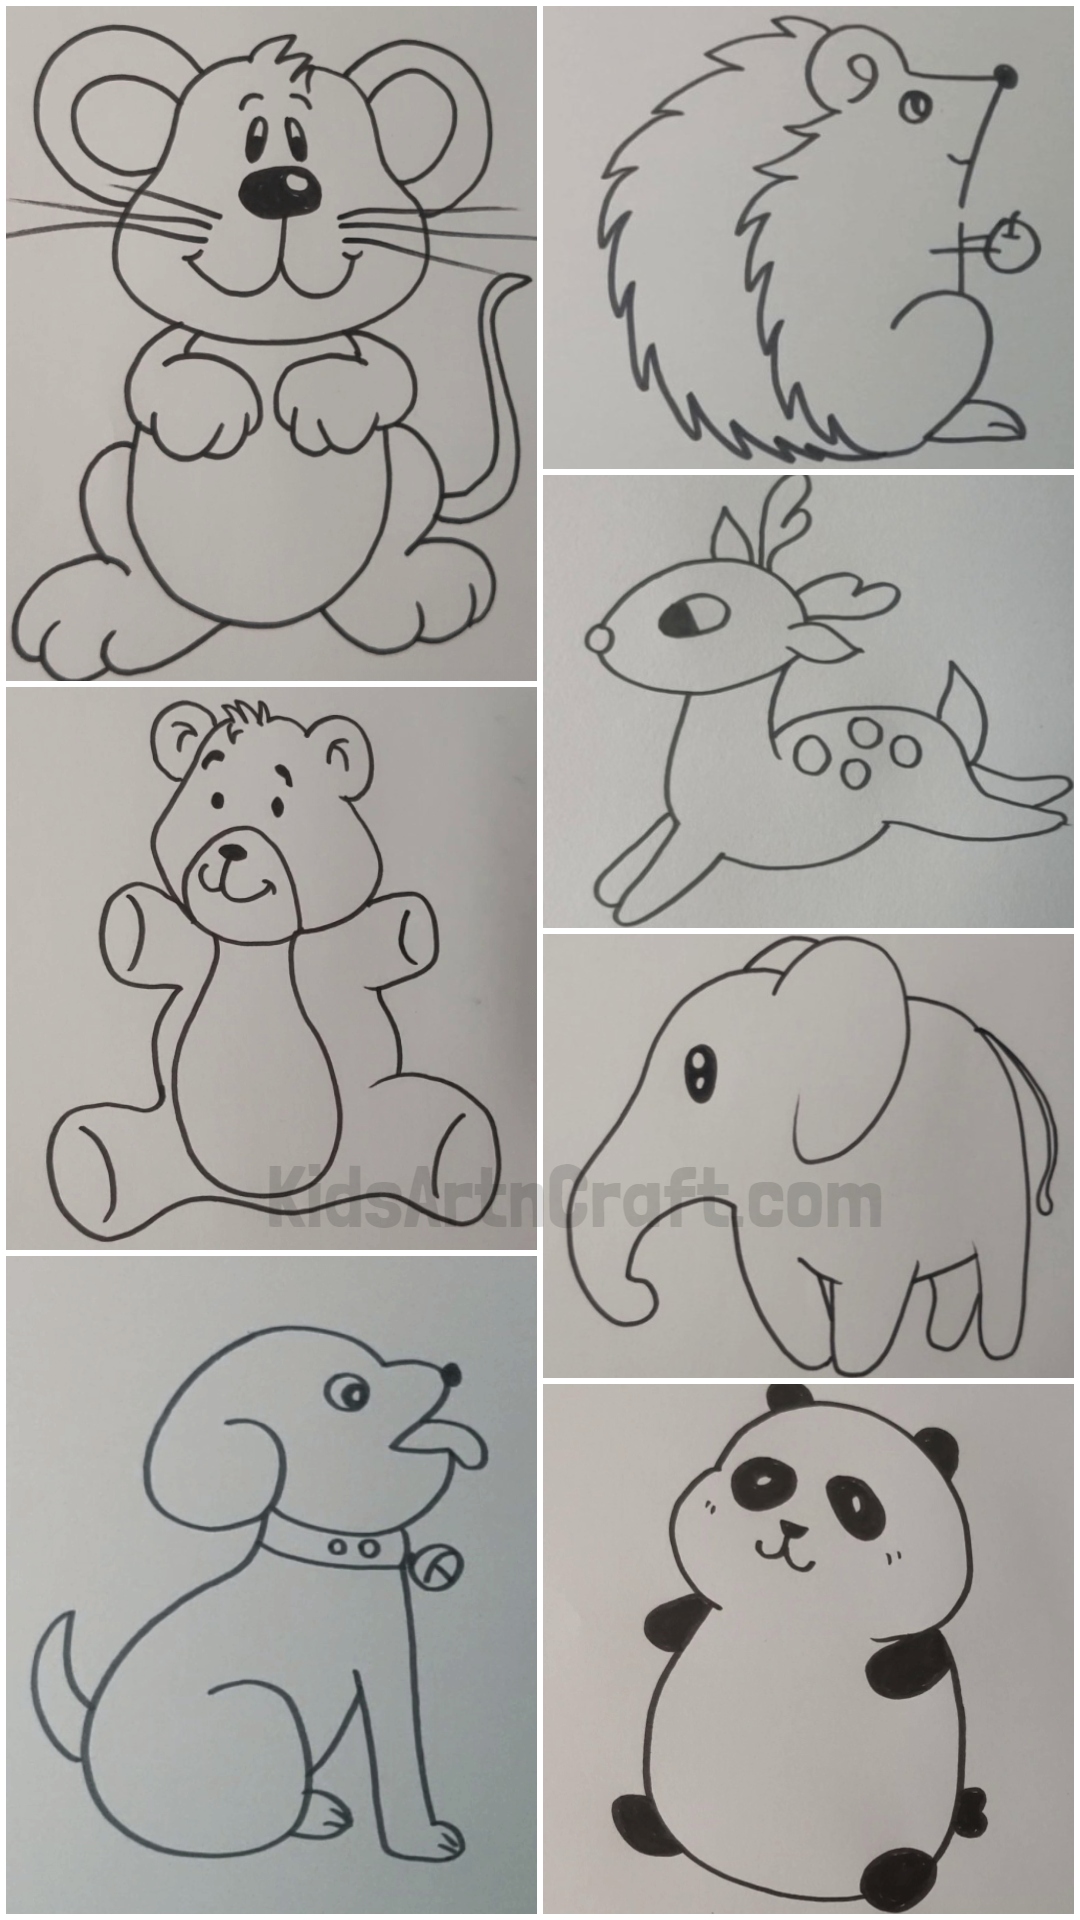 Easy to Draw Cute Animal Drawings for Kids